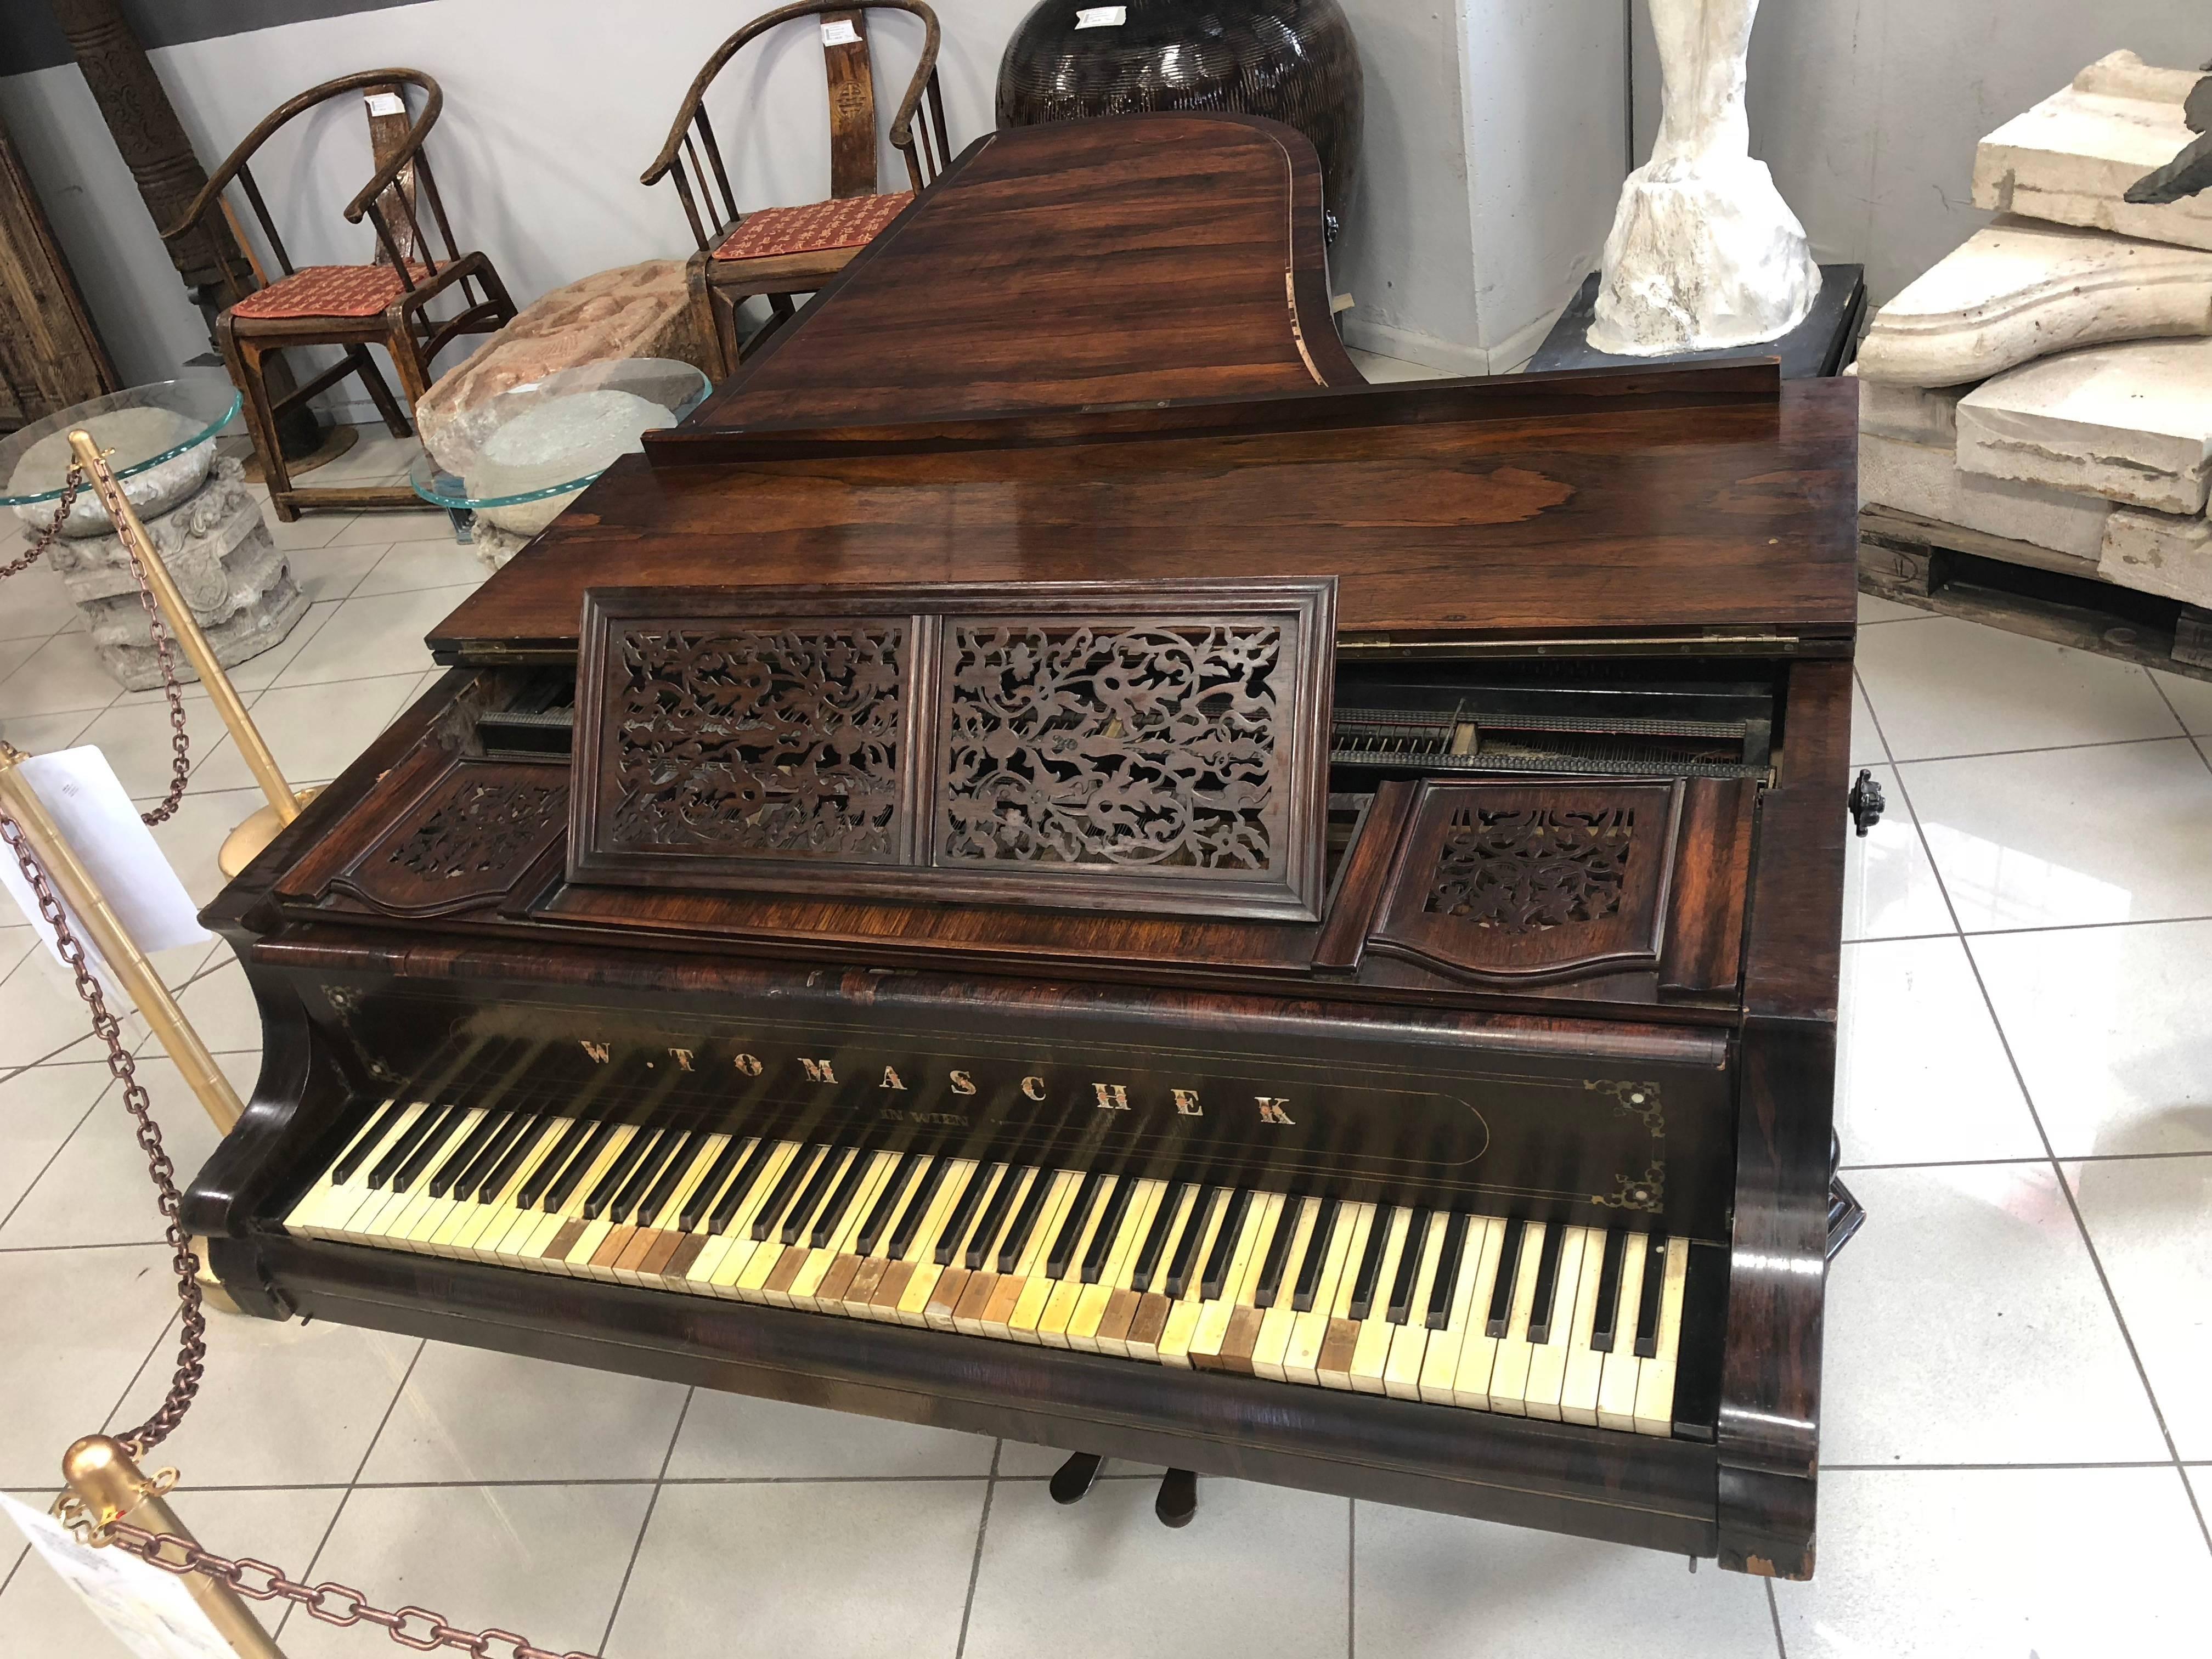 Mid-19th century Viennese piano. Keyboard cover bears maker's name 